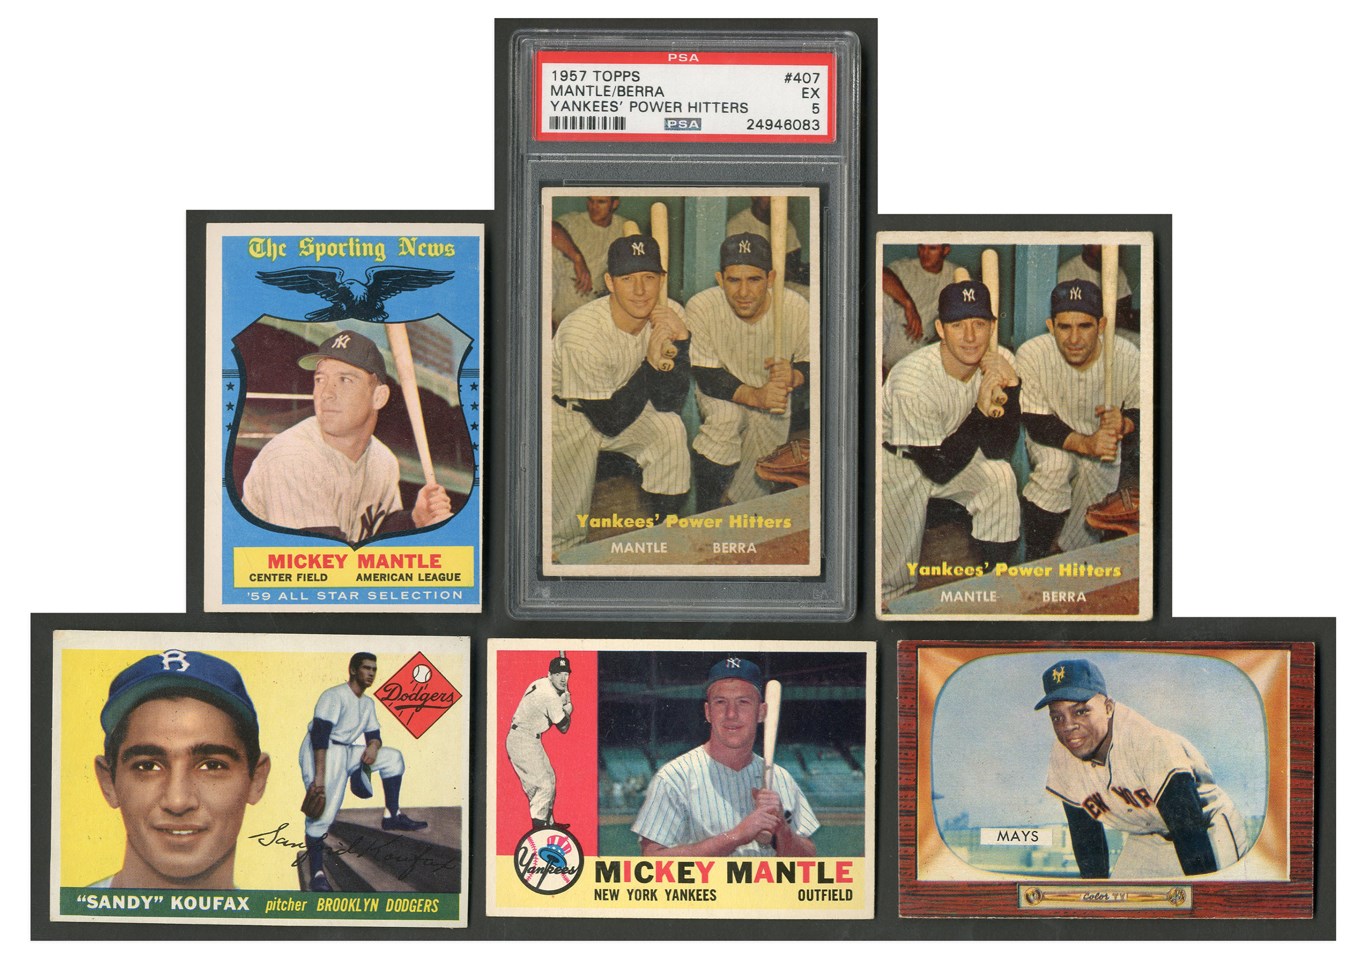 Baseball and Trading Cards - 1955-1976 Topps, Bowman & OPC Baseball & Football Card Collection (31) with 15 Mickey Mantles!